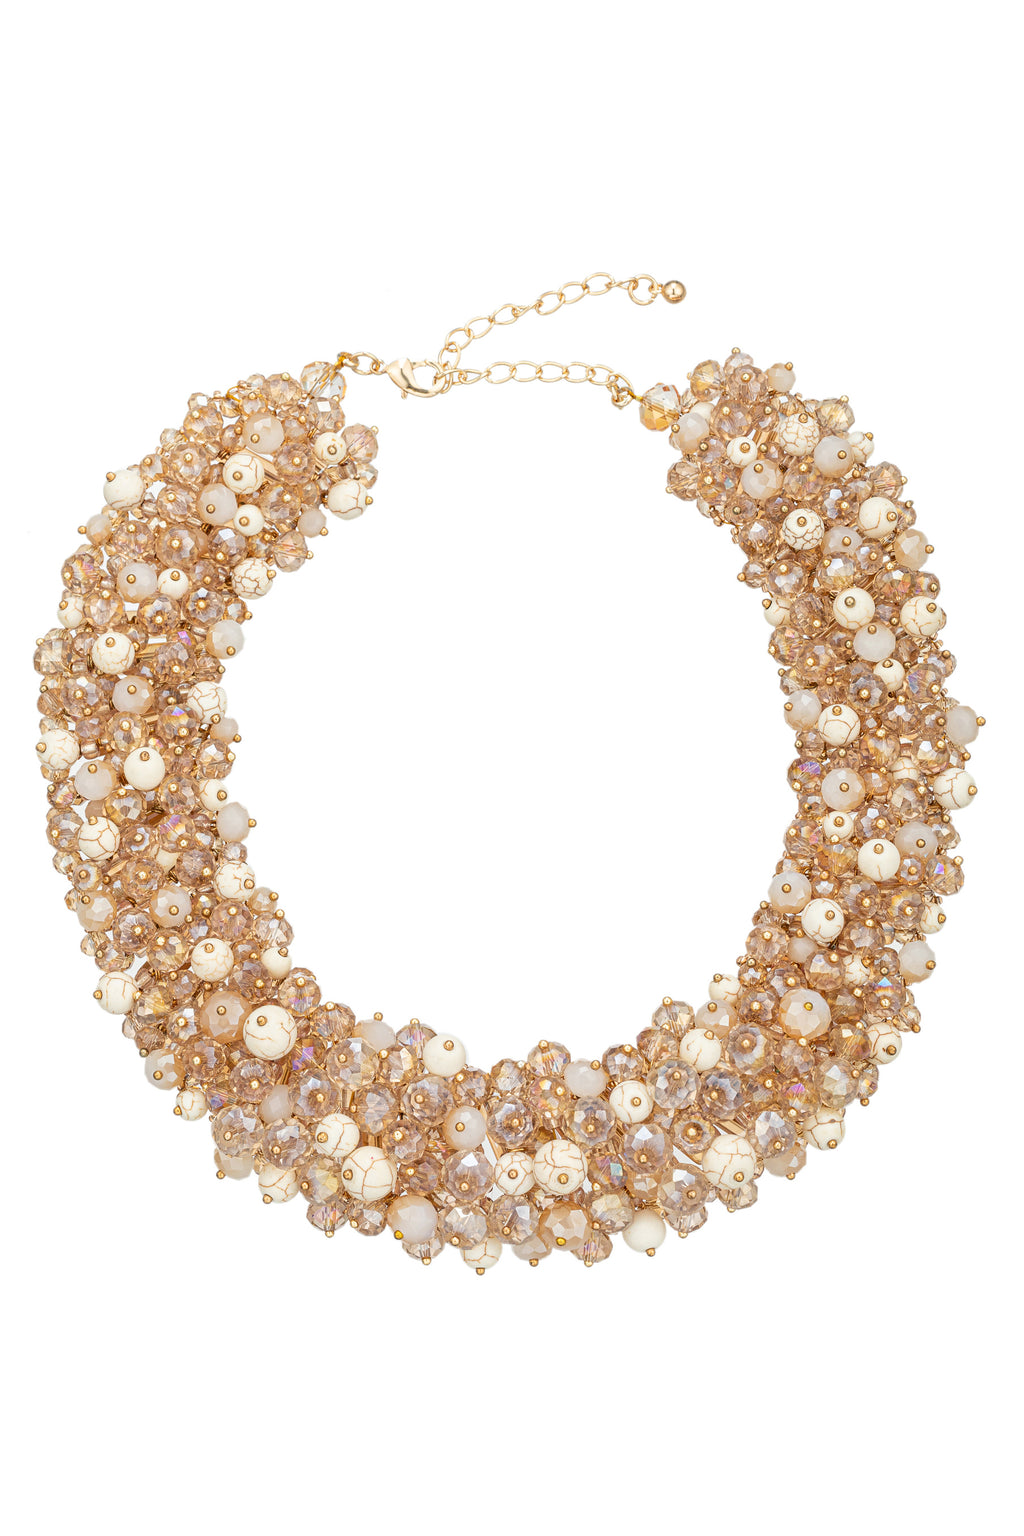 Gold & white beaded statement collar necklace.